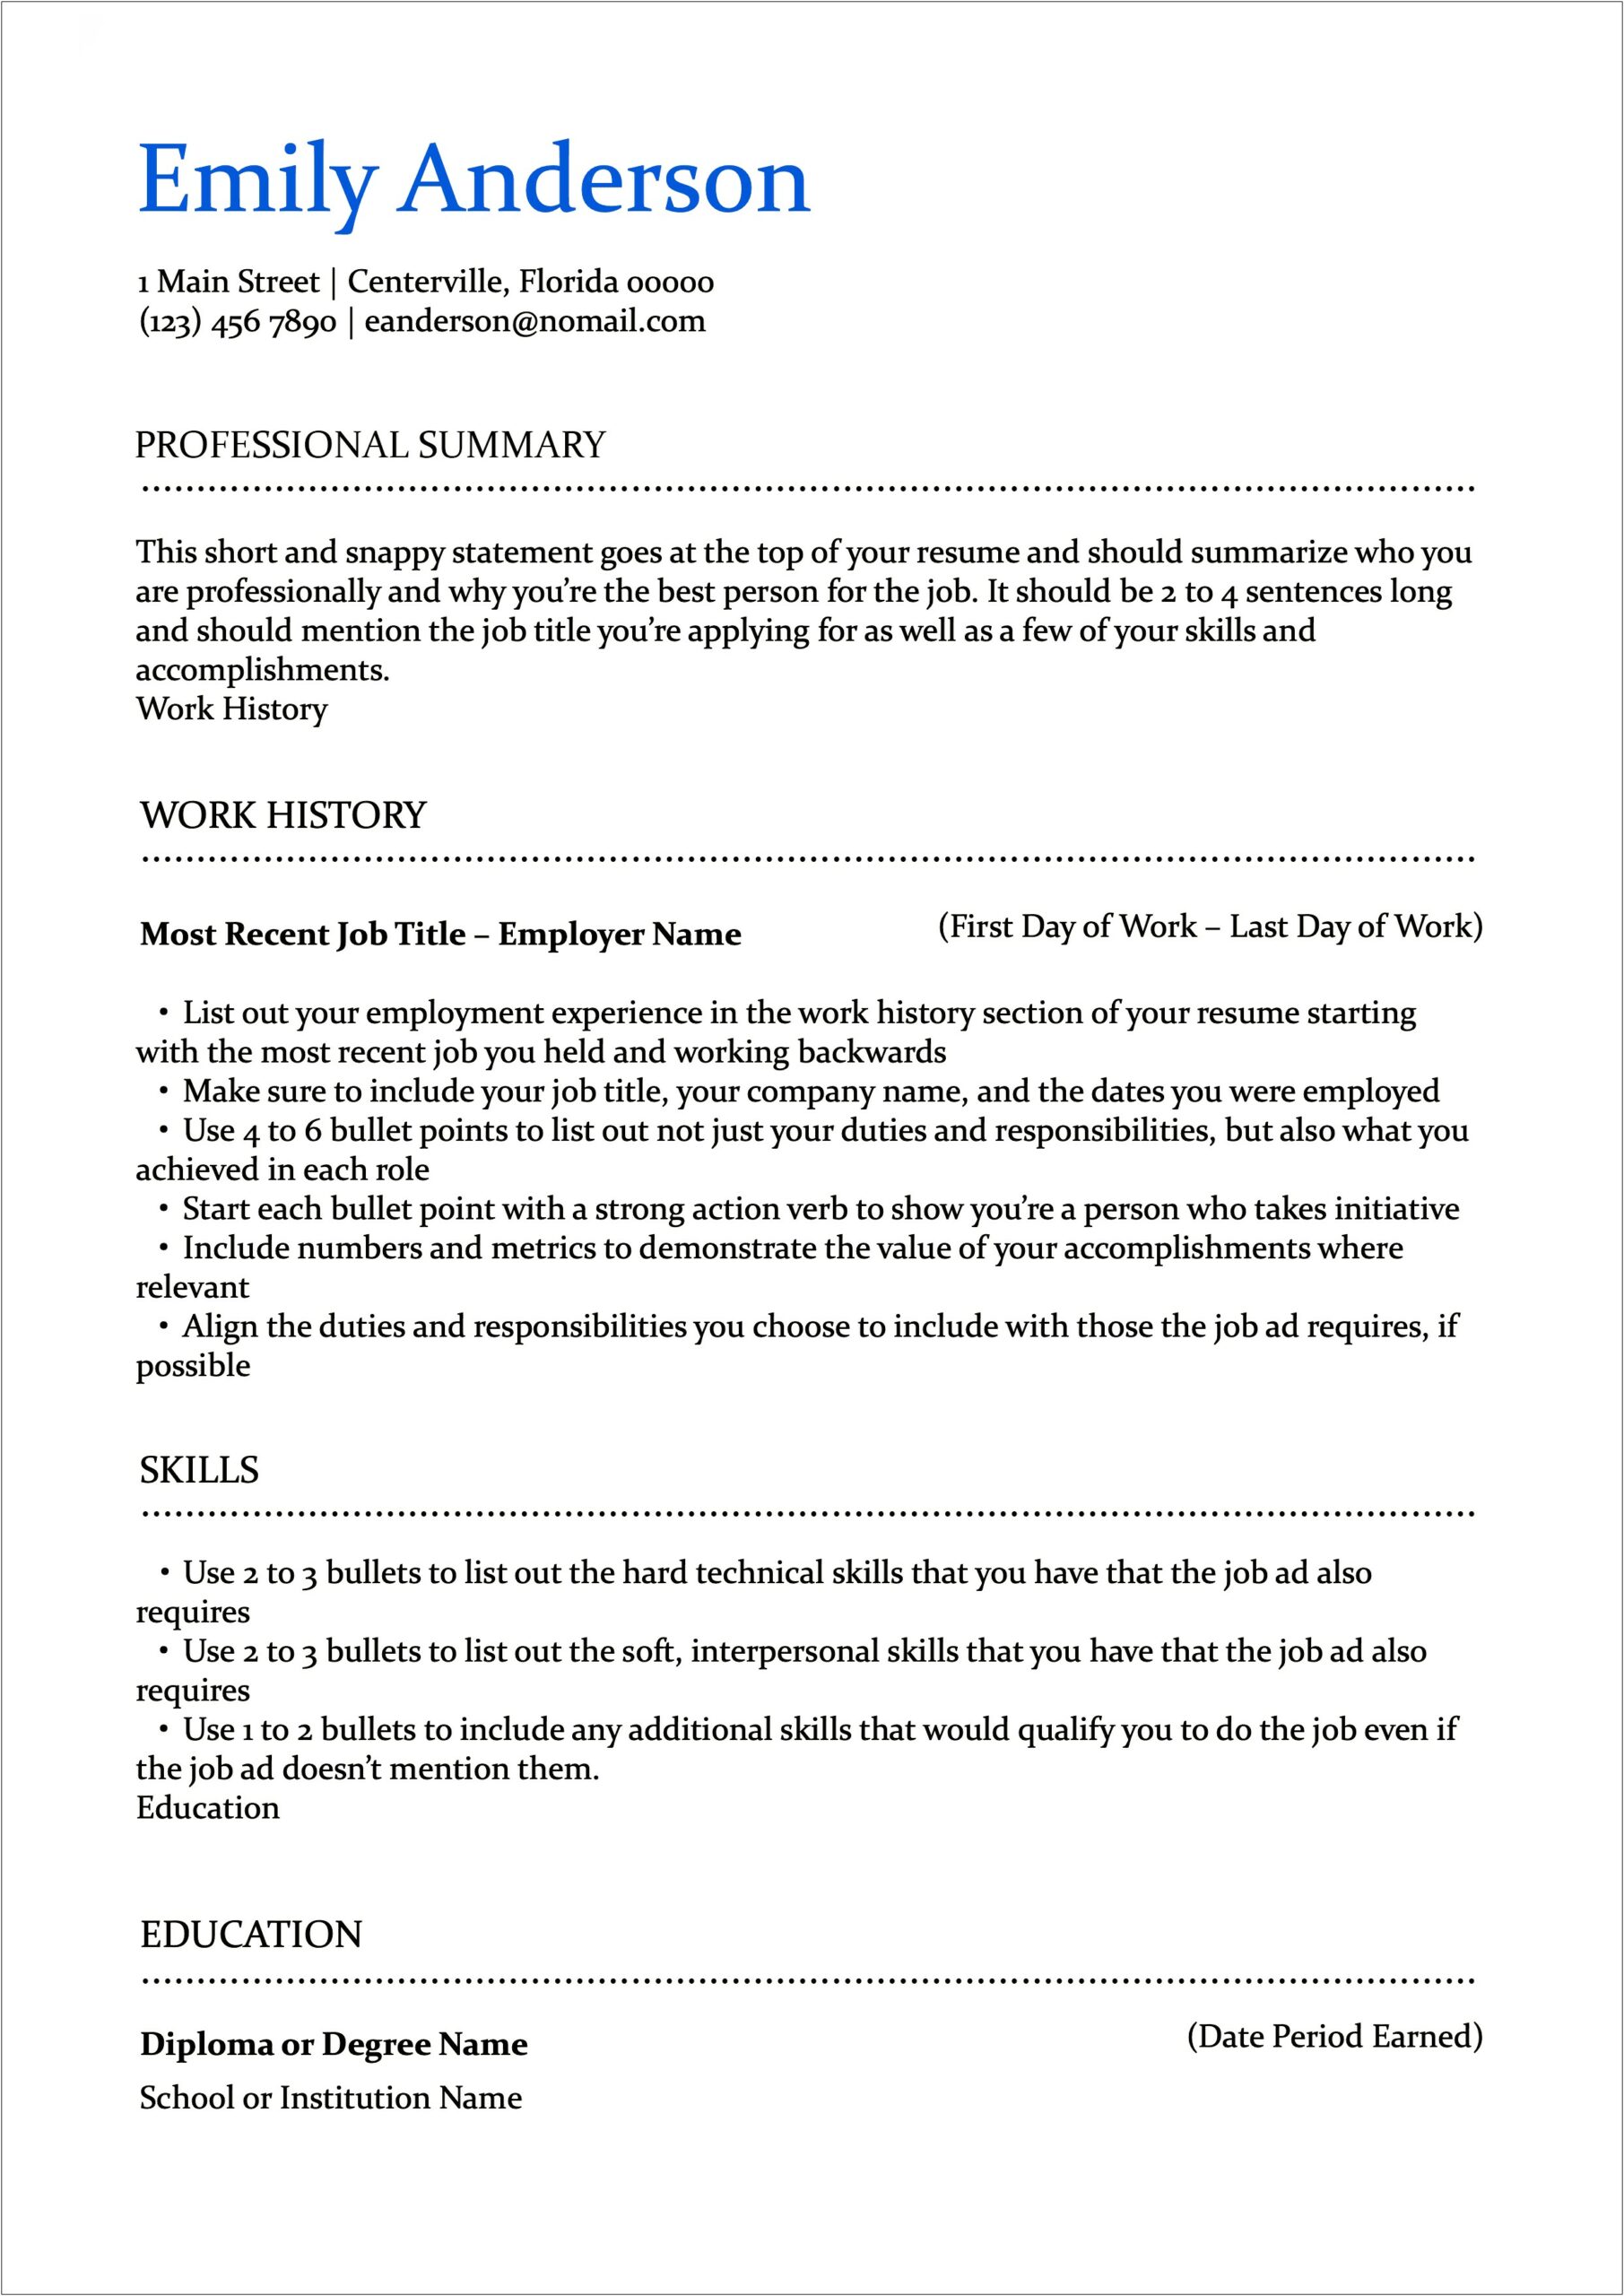 Professional Summary On A Resume For Customer Service